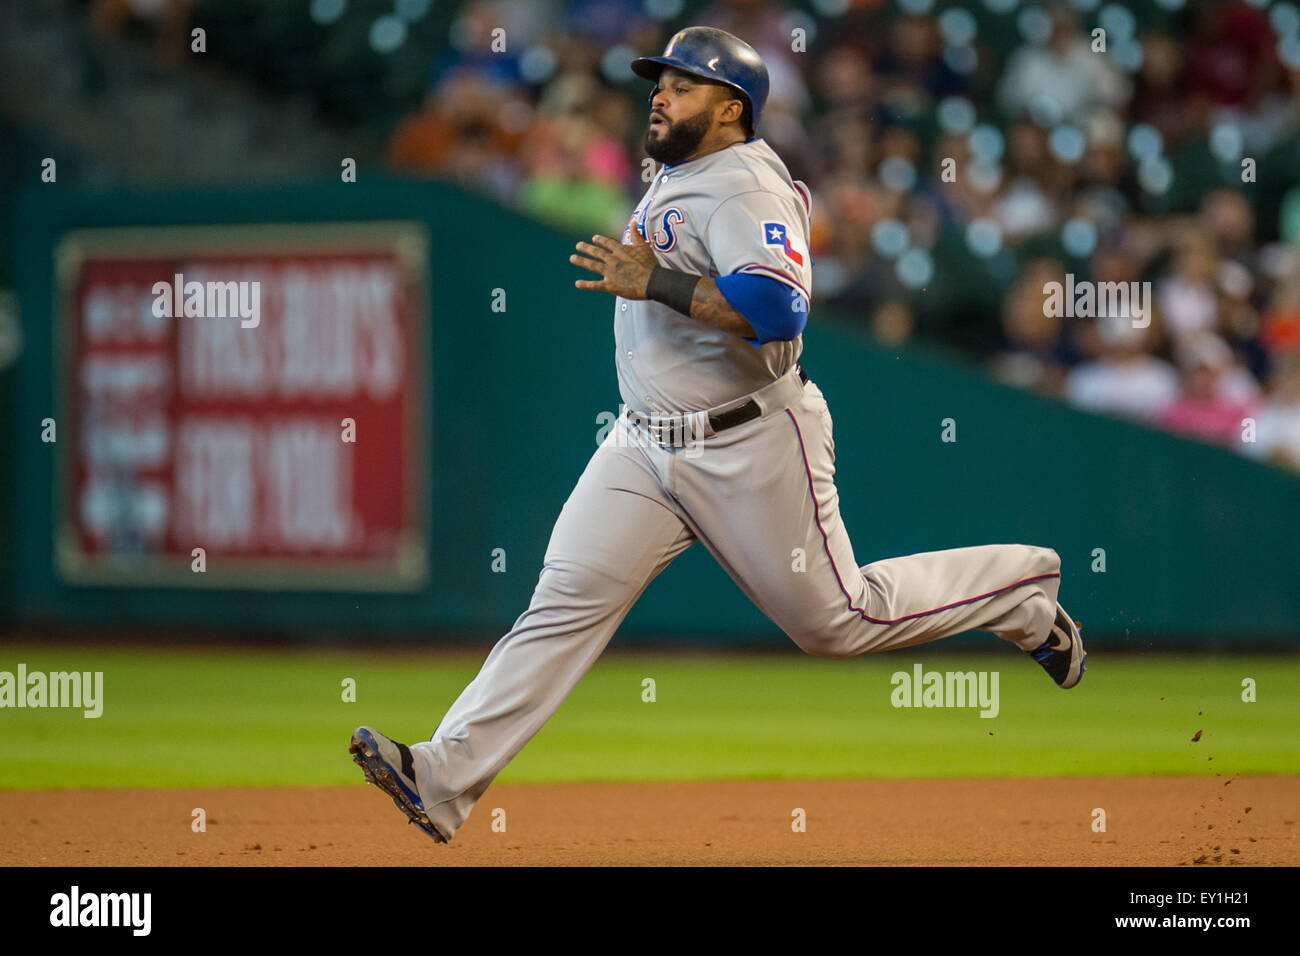 Prince Fielder Archives - Page 14 of 429 - MLB